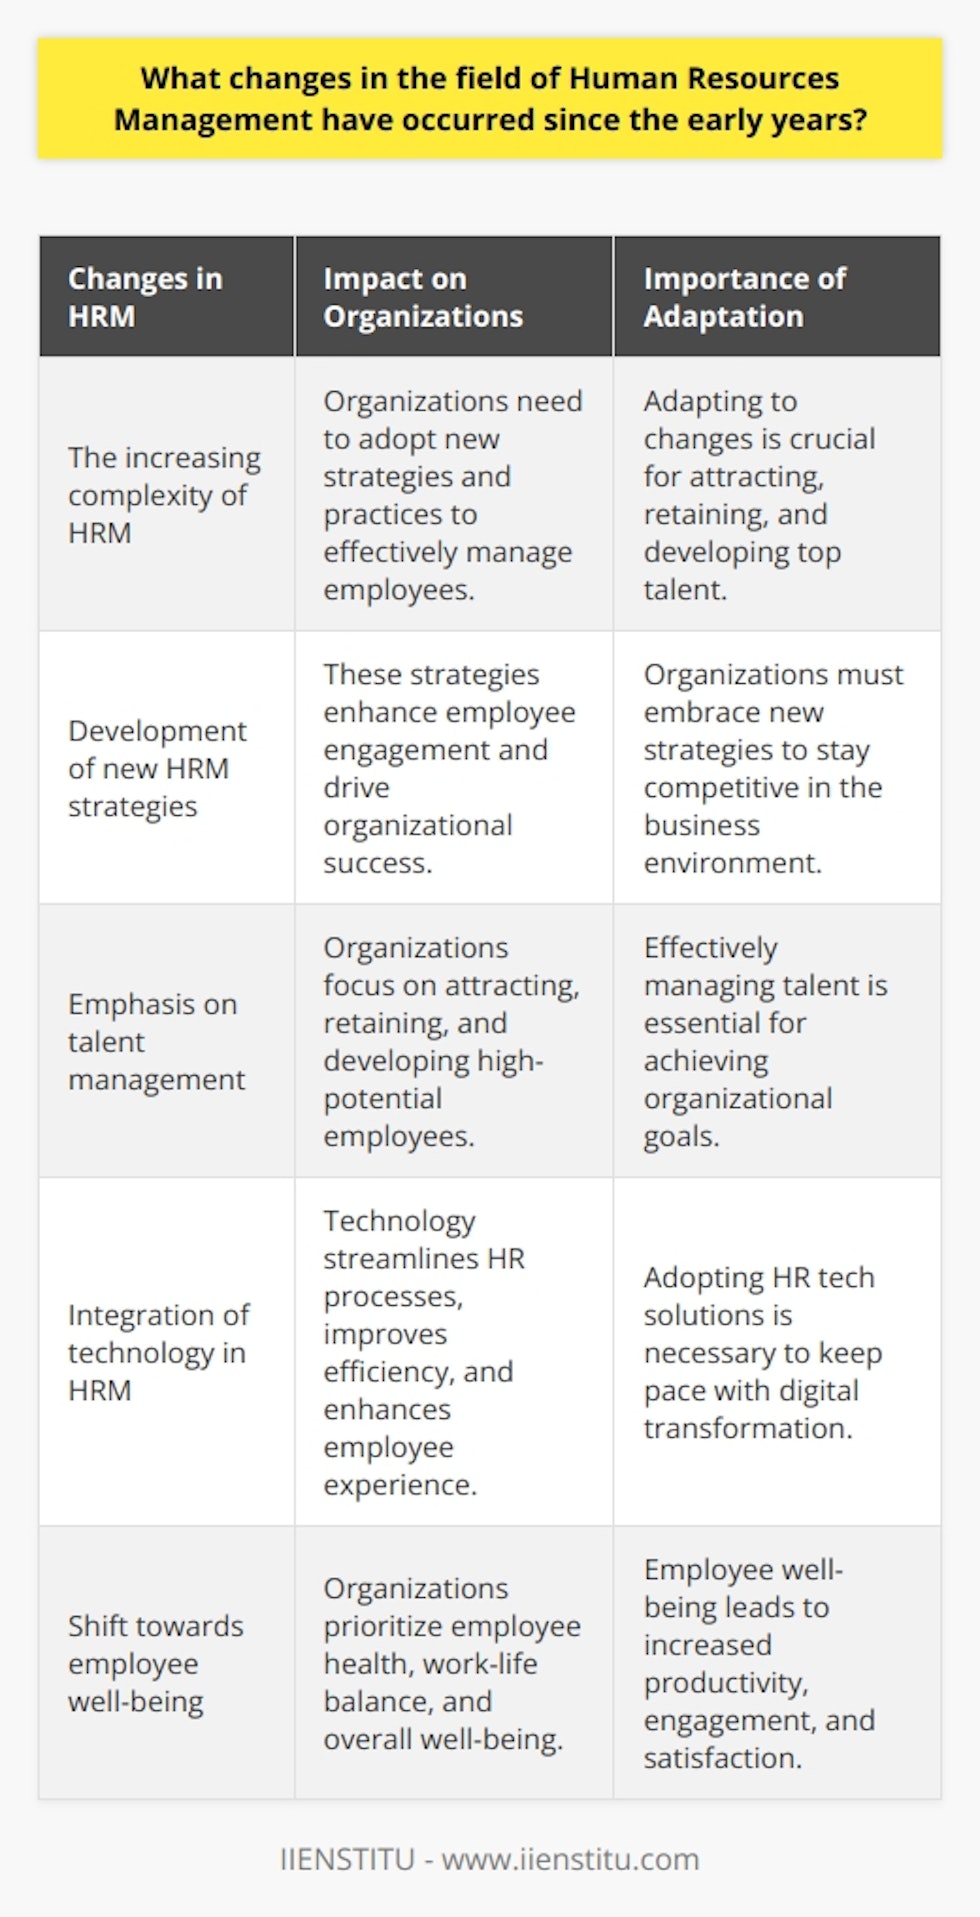 These changes have made HRM more complex and have resulted in the development of new strategies and practices to effectively manage and engage employees. It is important for organizations to continue to adapt to these changes in order to attract, retain, and develop top talent in today's competitive business environment. By implementing these changes, HRM can play a vital role in driving organizational success and ensuring the well-being of its employees. IIENSTITU is at the forefront of these changes and continues to provide innovative solutions and training programs to help organizations navigate the evolving field of HRM.